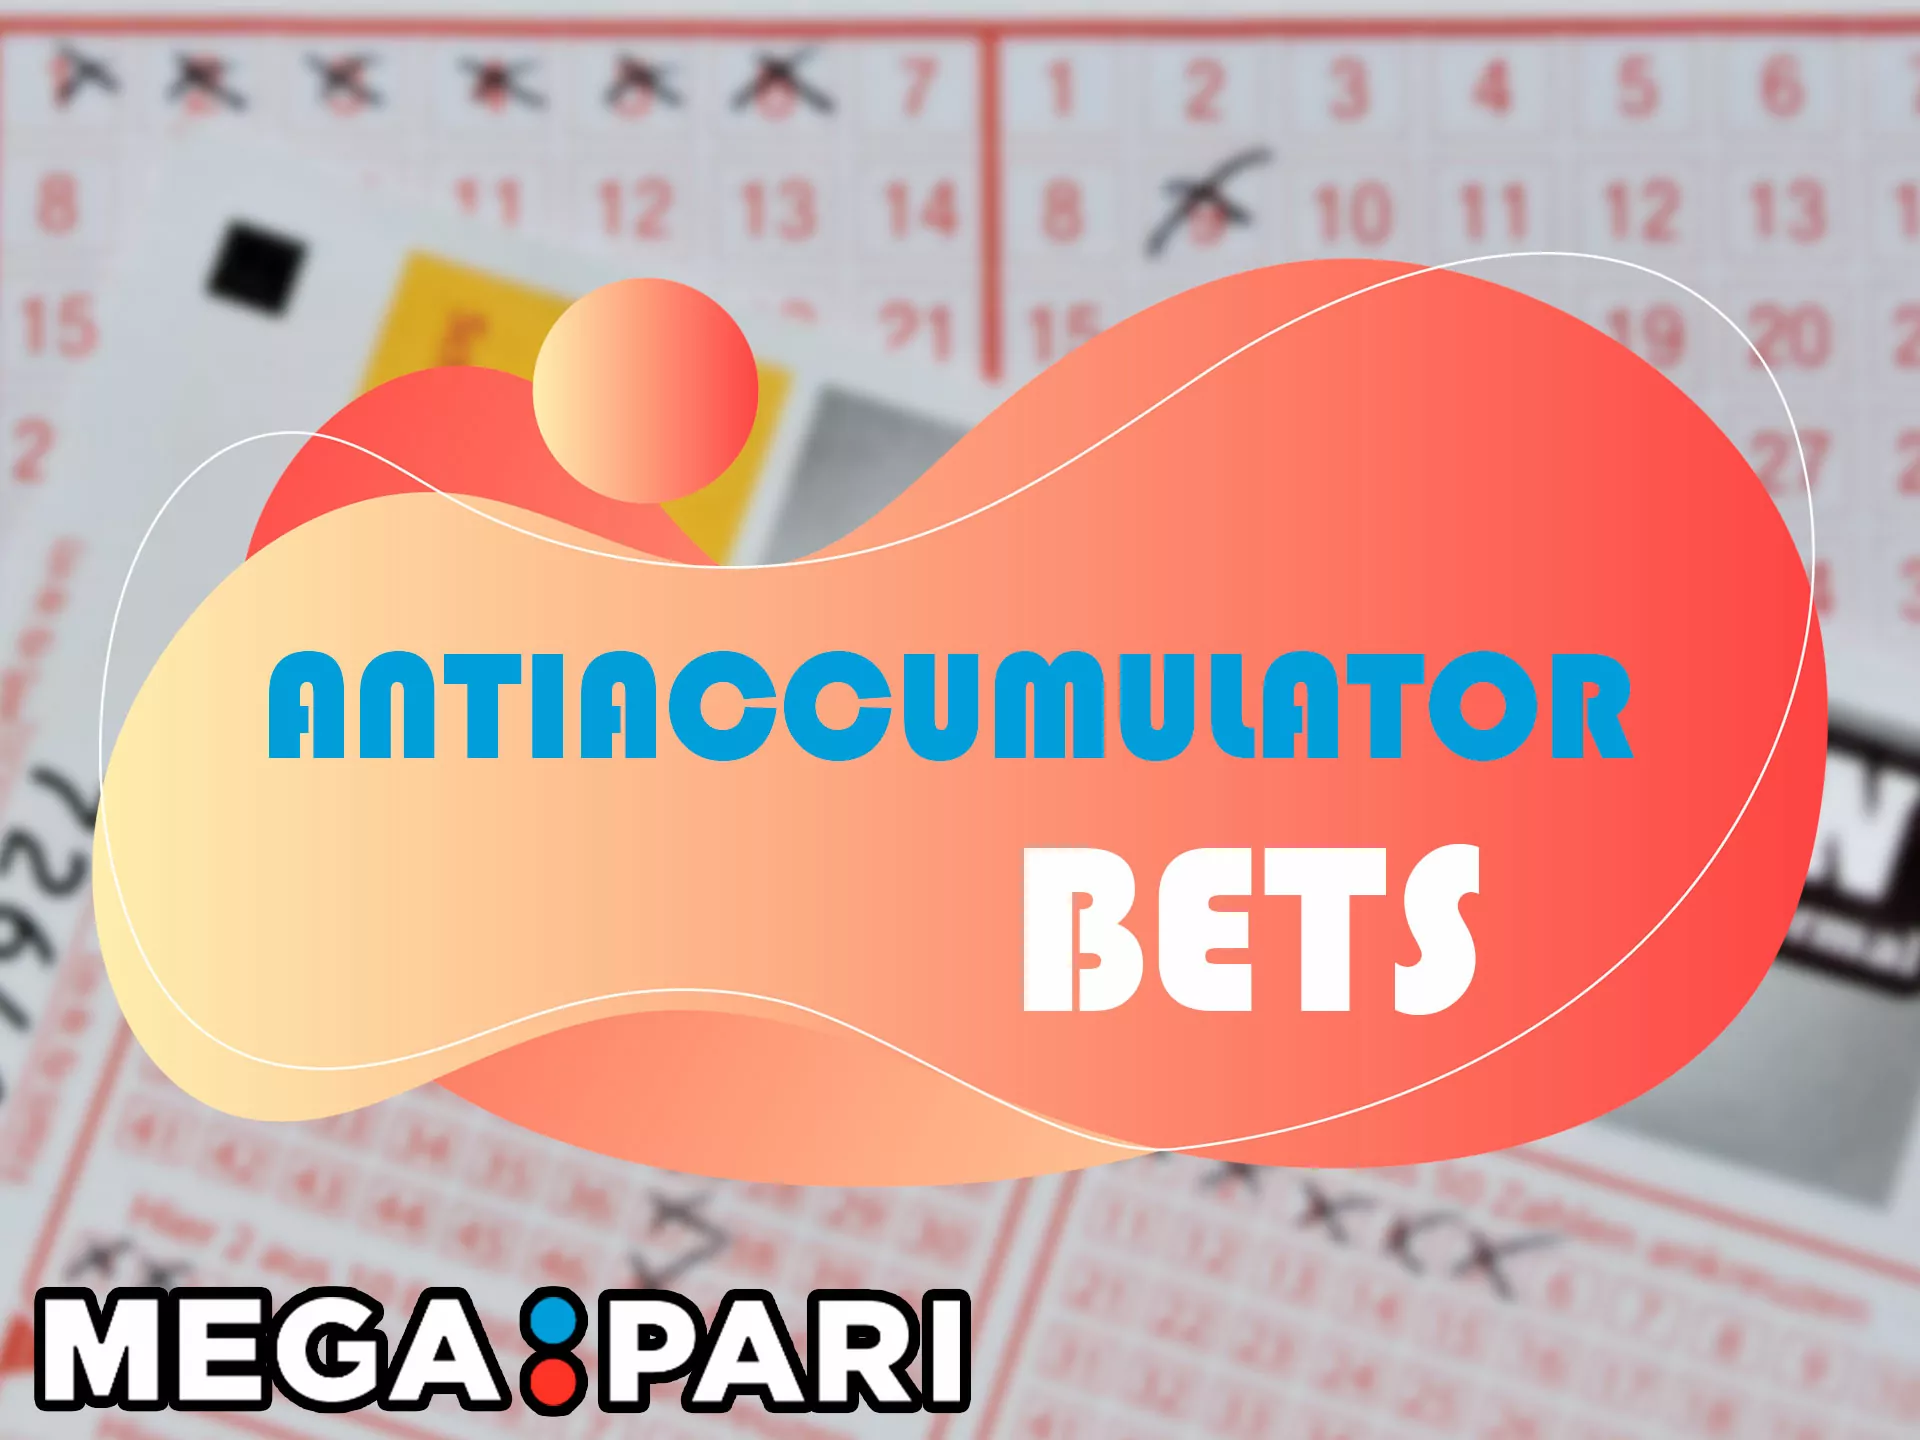 This is a completely opposite type of bet, here you need to make several bets, you will learn more in our article.